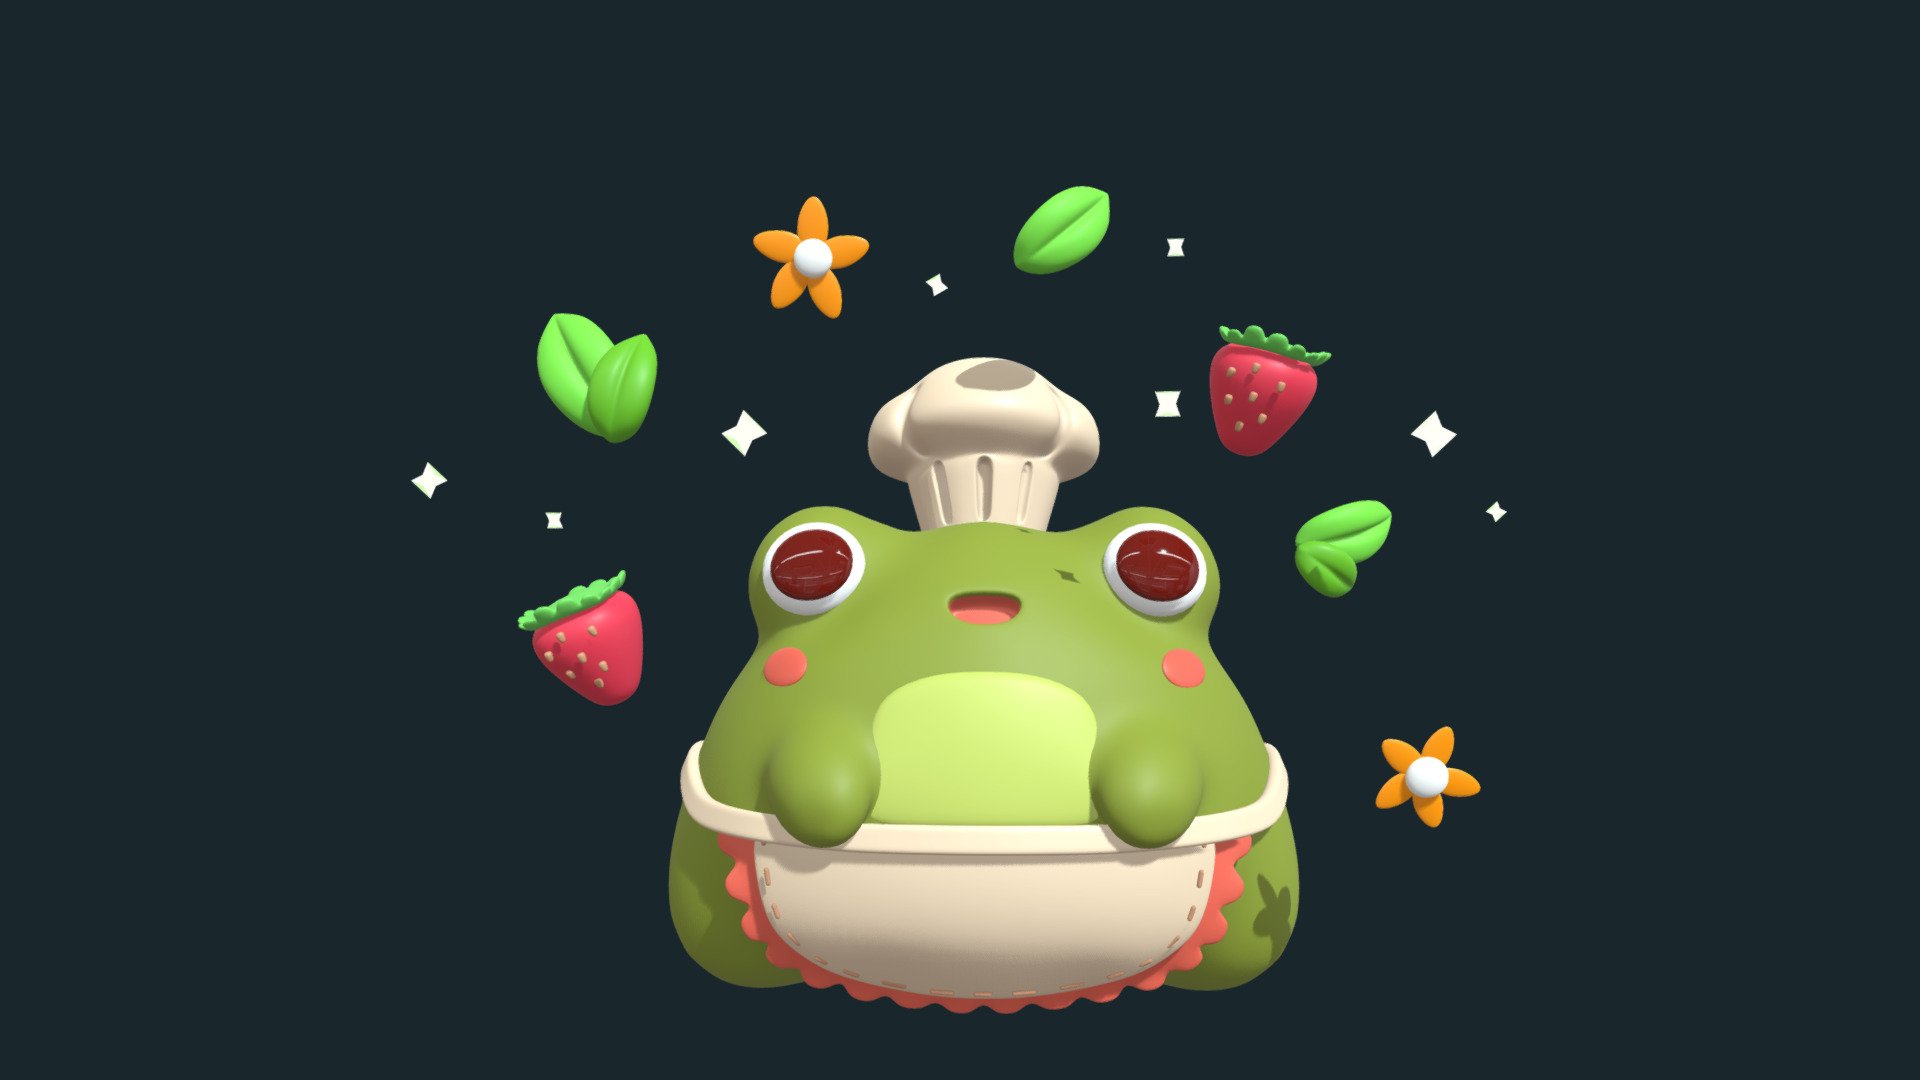 Cute baker frog modeled and textured in Blender. 
This was an entry for a draw this in your challenge hosted by @peony sprout on Instagram 3d model